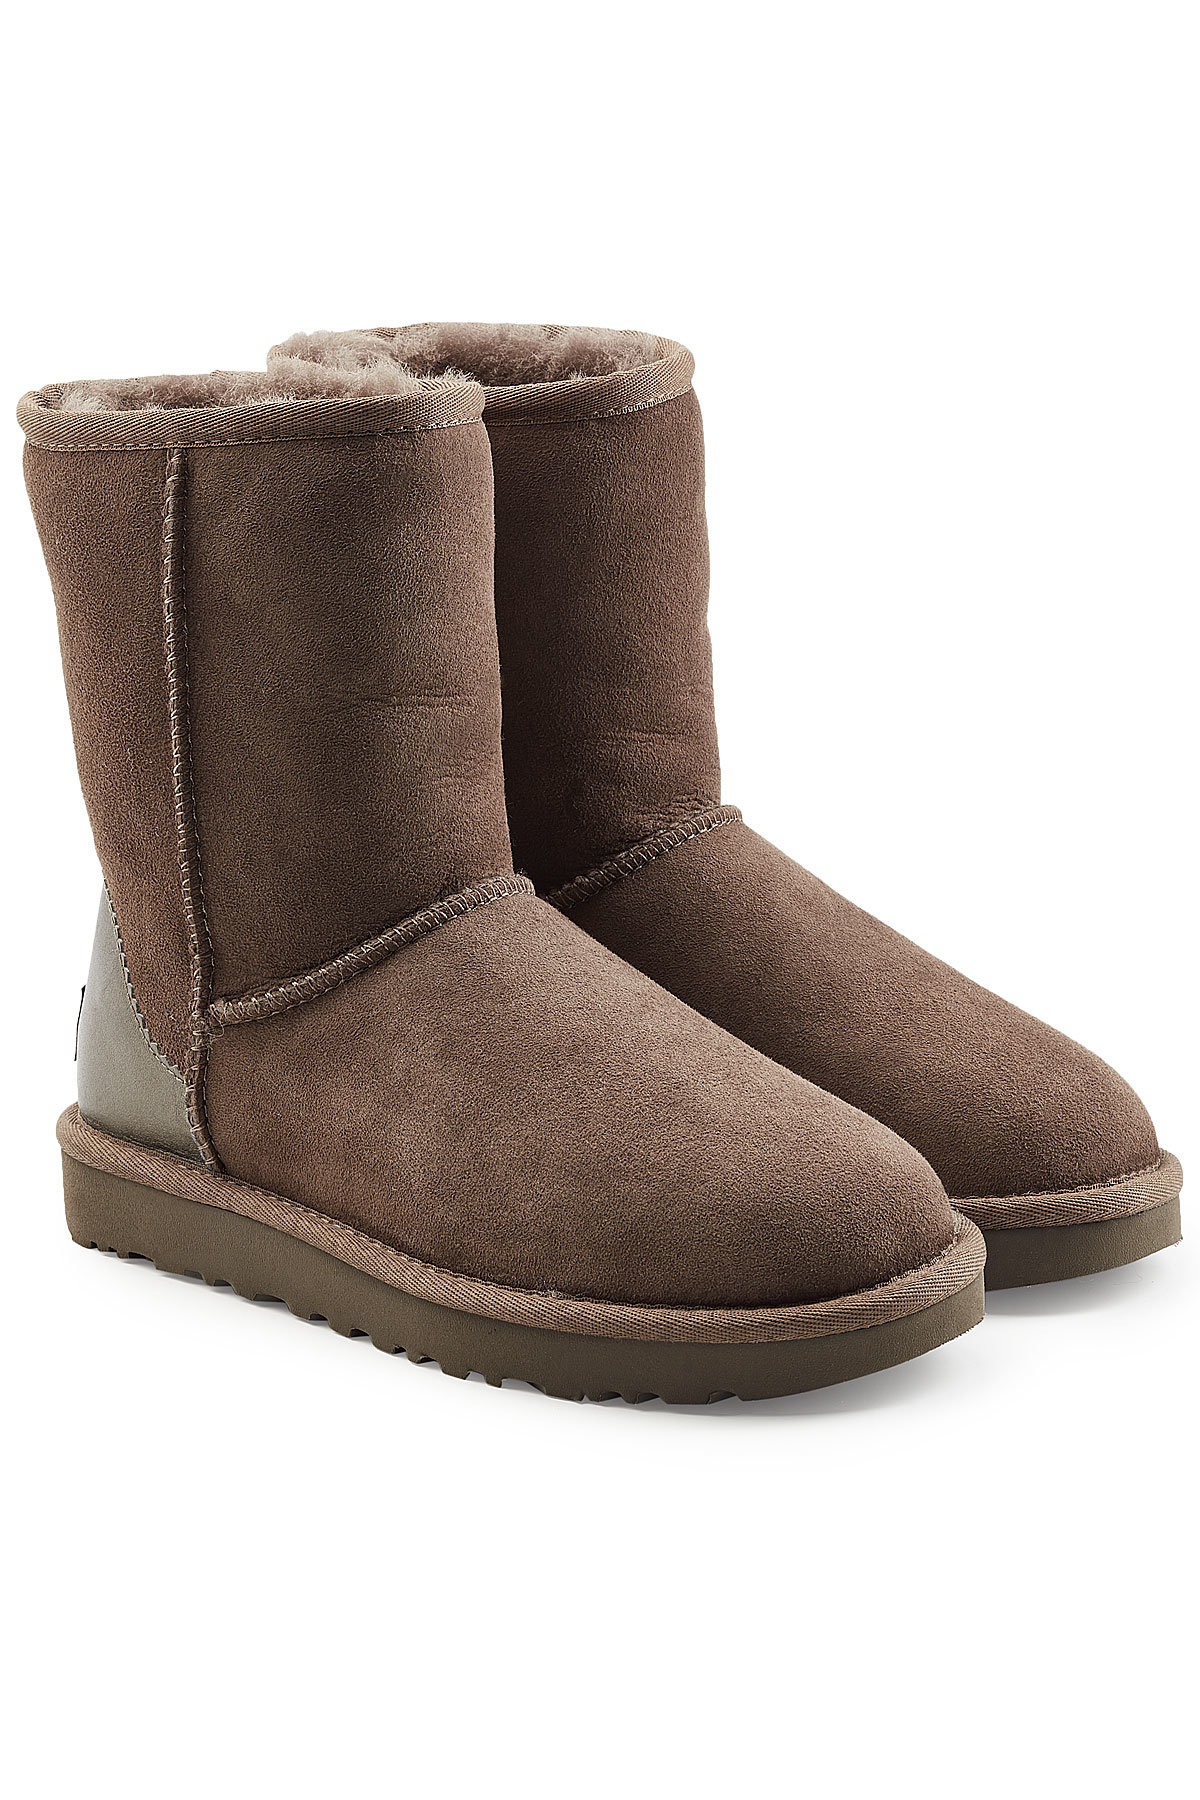 Classic Short Suede Boots with Metallic Detail by UGG Australia